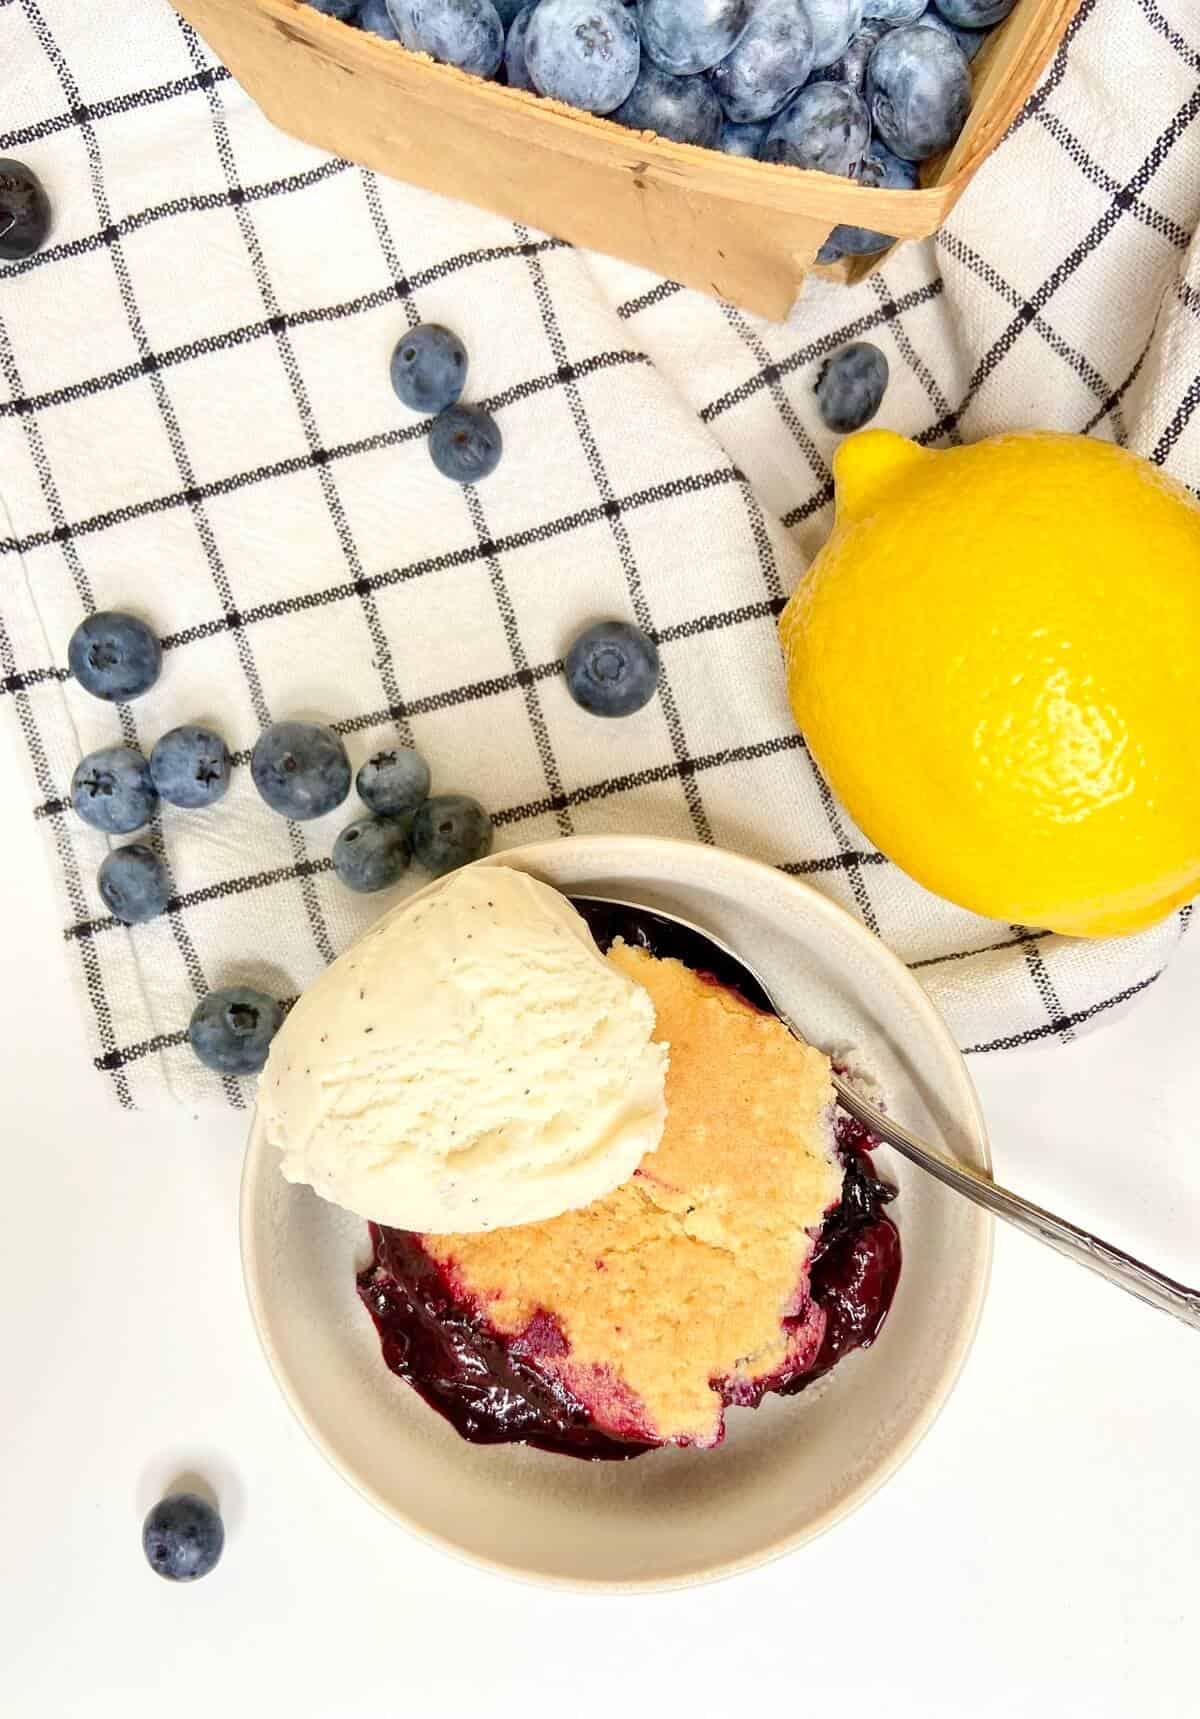 Cobbler with ice cream in a small dessert bowl, on a table with blueberries and a lemon.